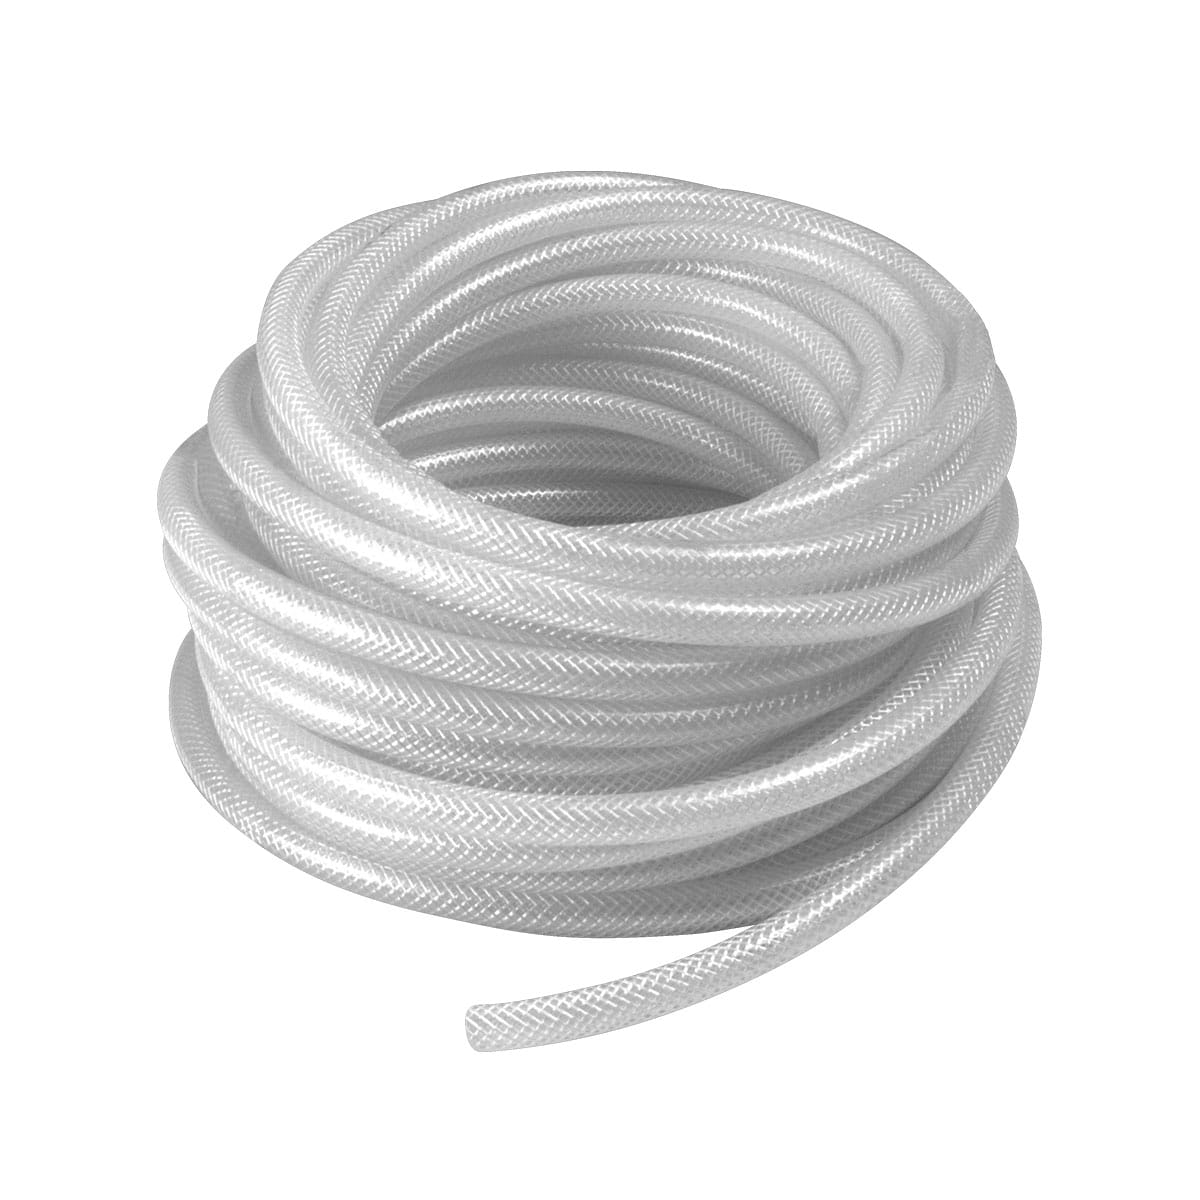 Hydroponic Tubing  Tubing for Hydroponic Systems